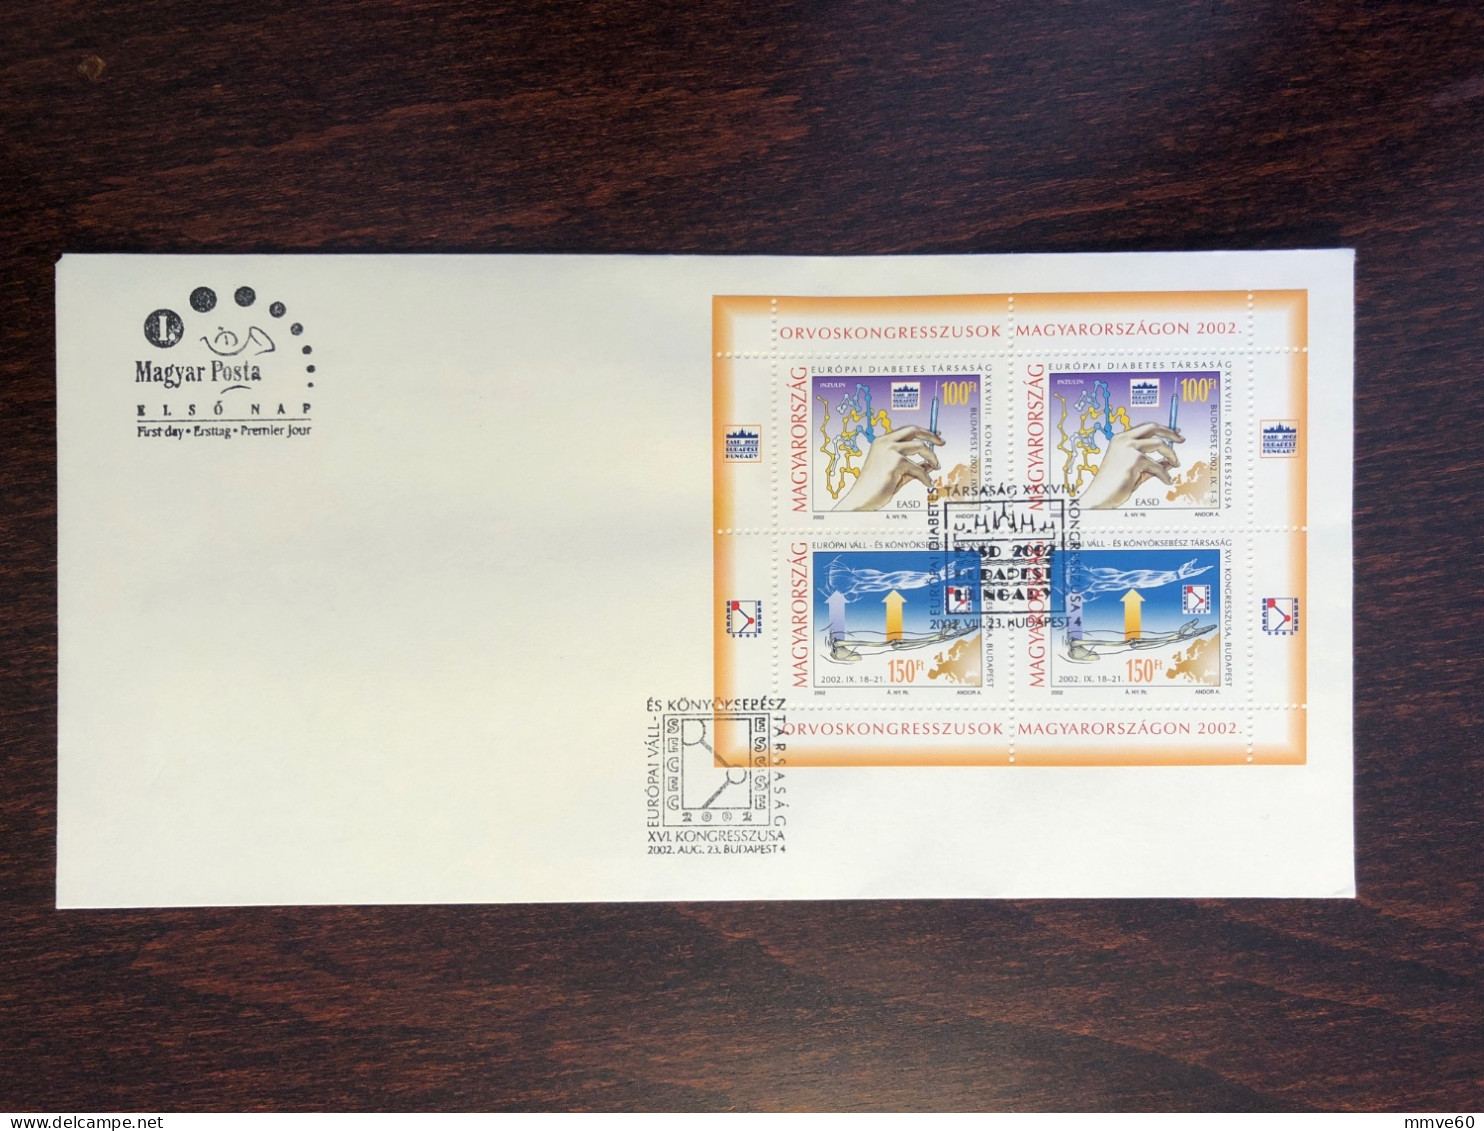 HUNGARY FDC COVER 2002 YEAR DIABETES SURGEONS HEALTH MEDICINE STAMPS - FDC